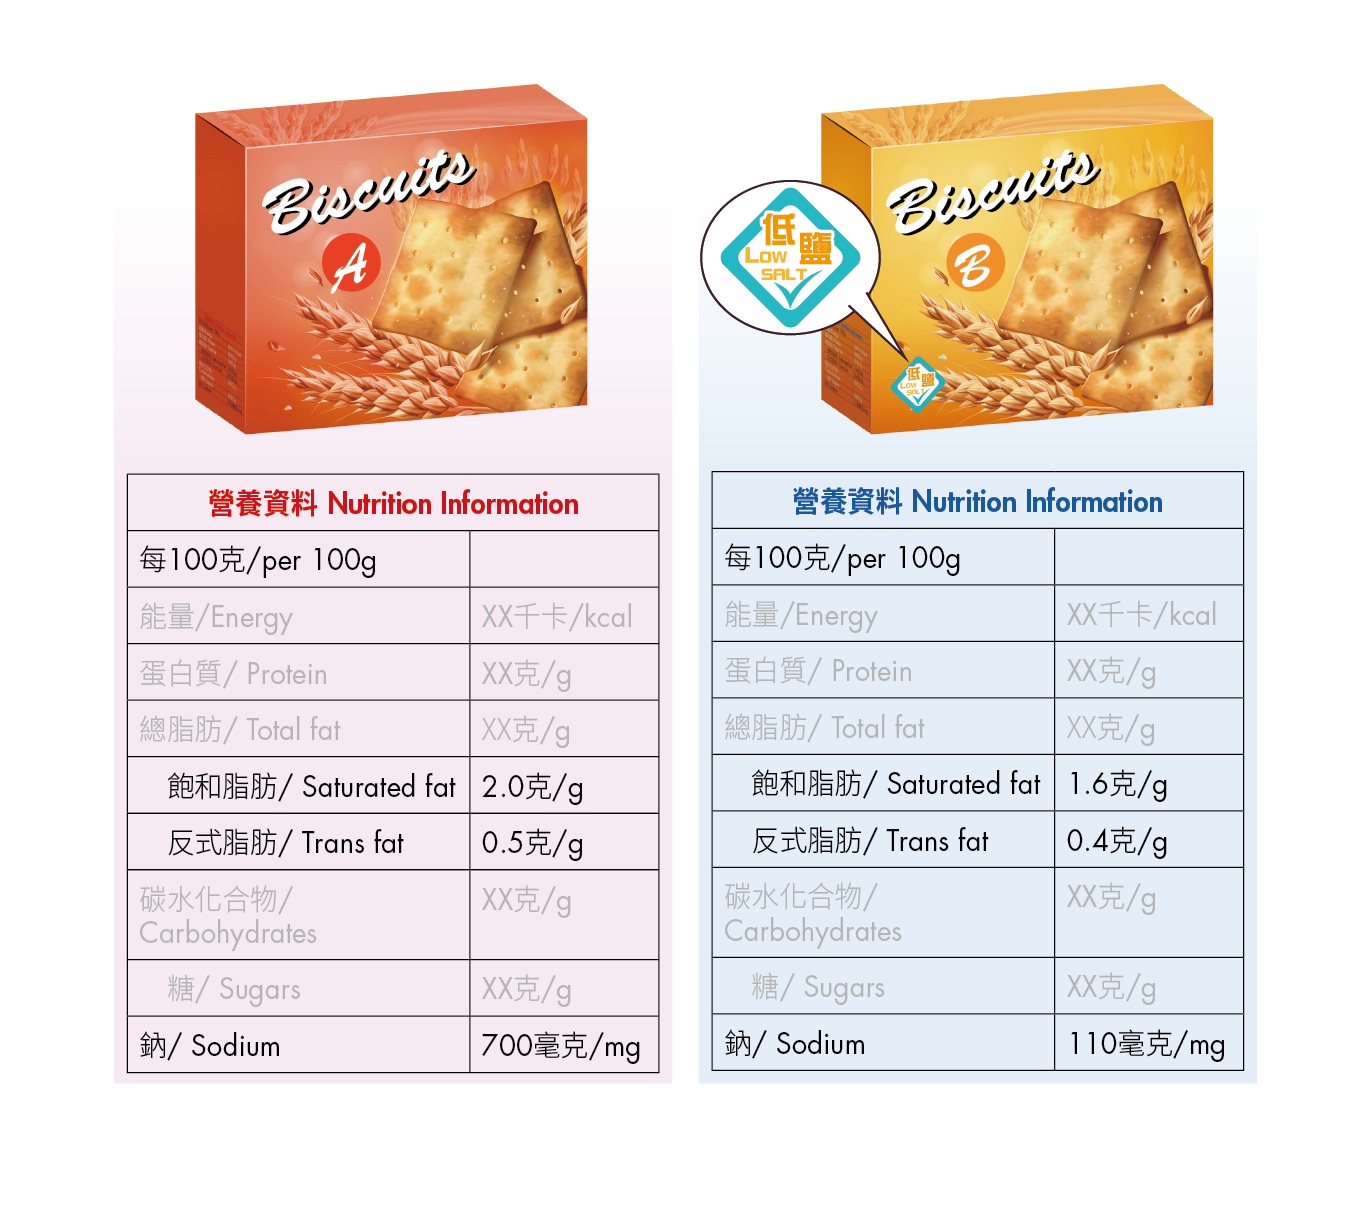 Two packs of biscuits with different sodium, saturated fat and trans fat contents.